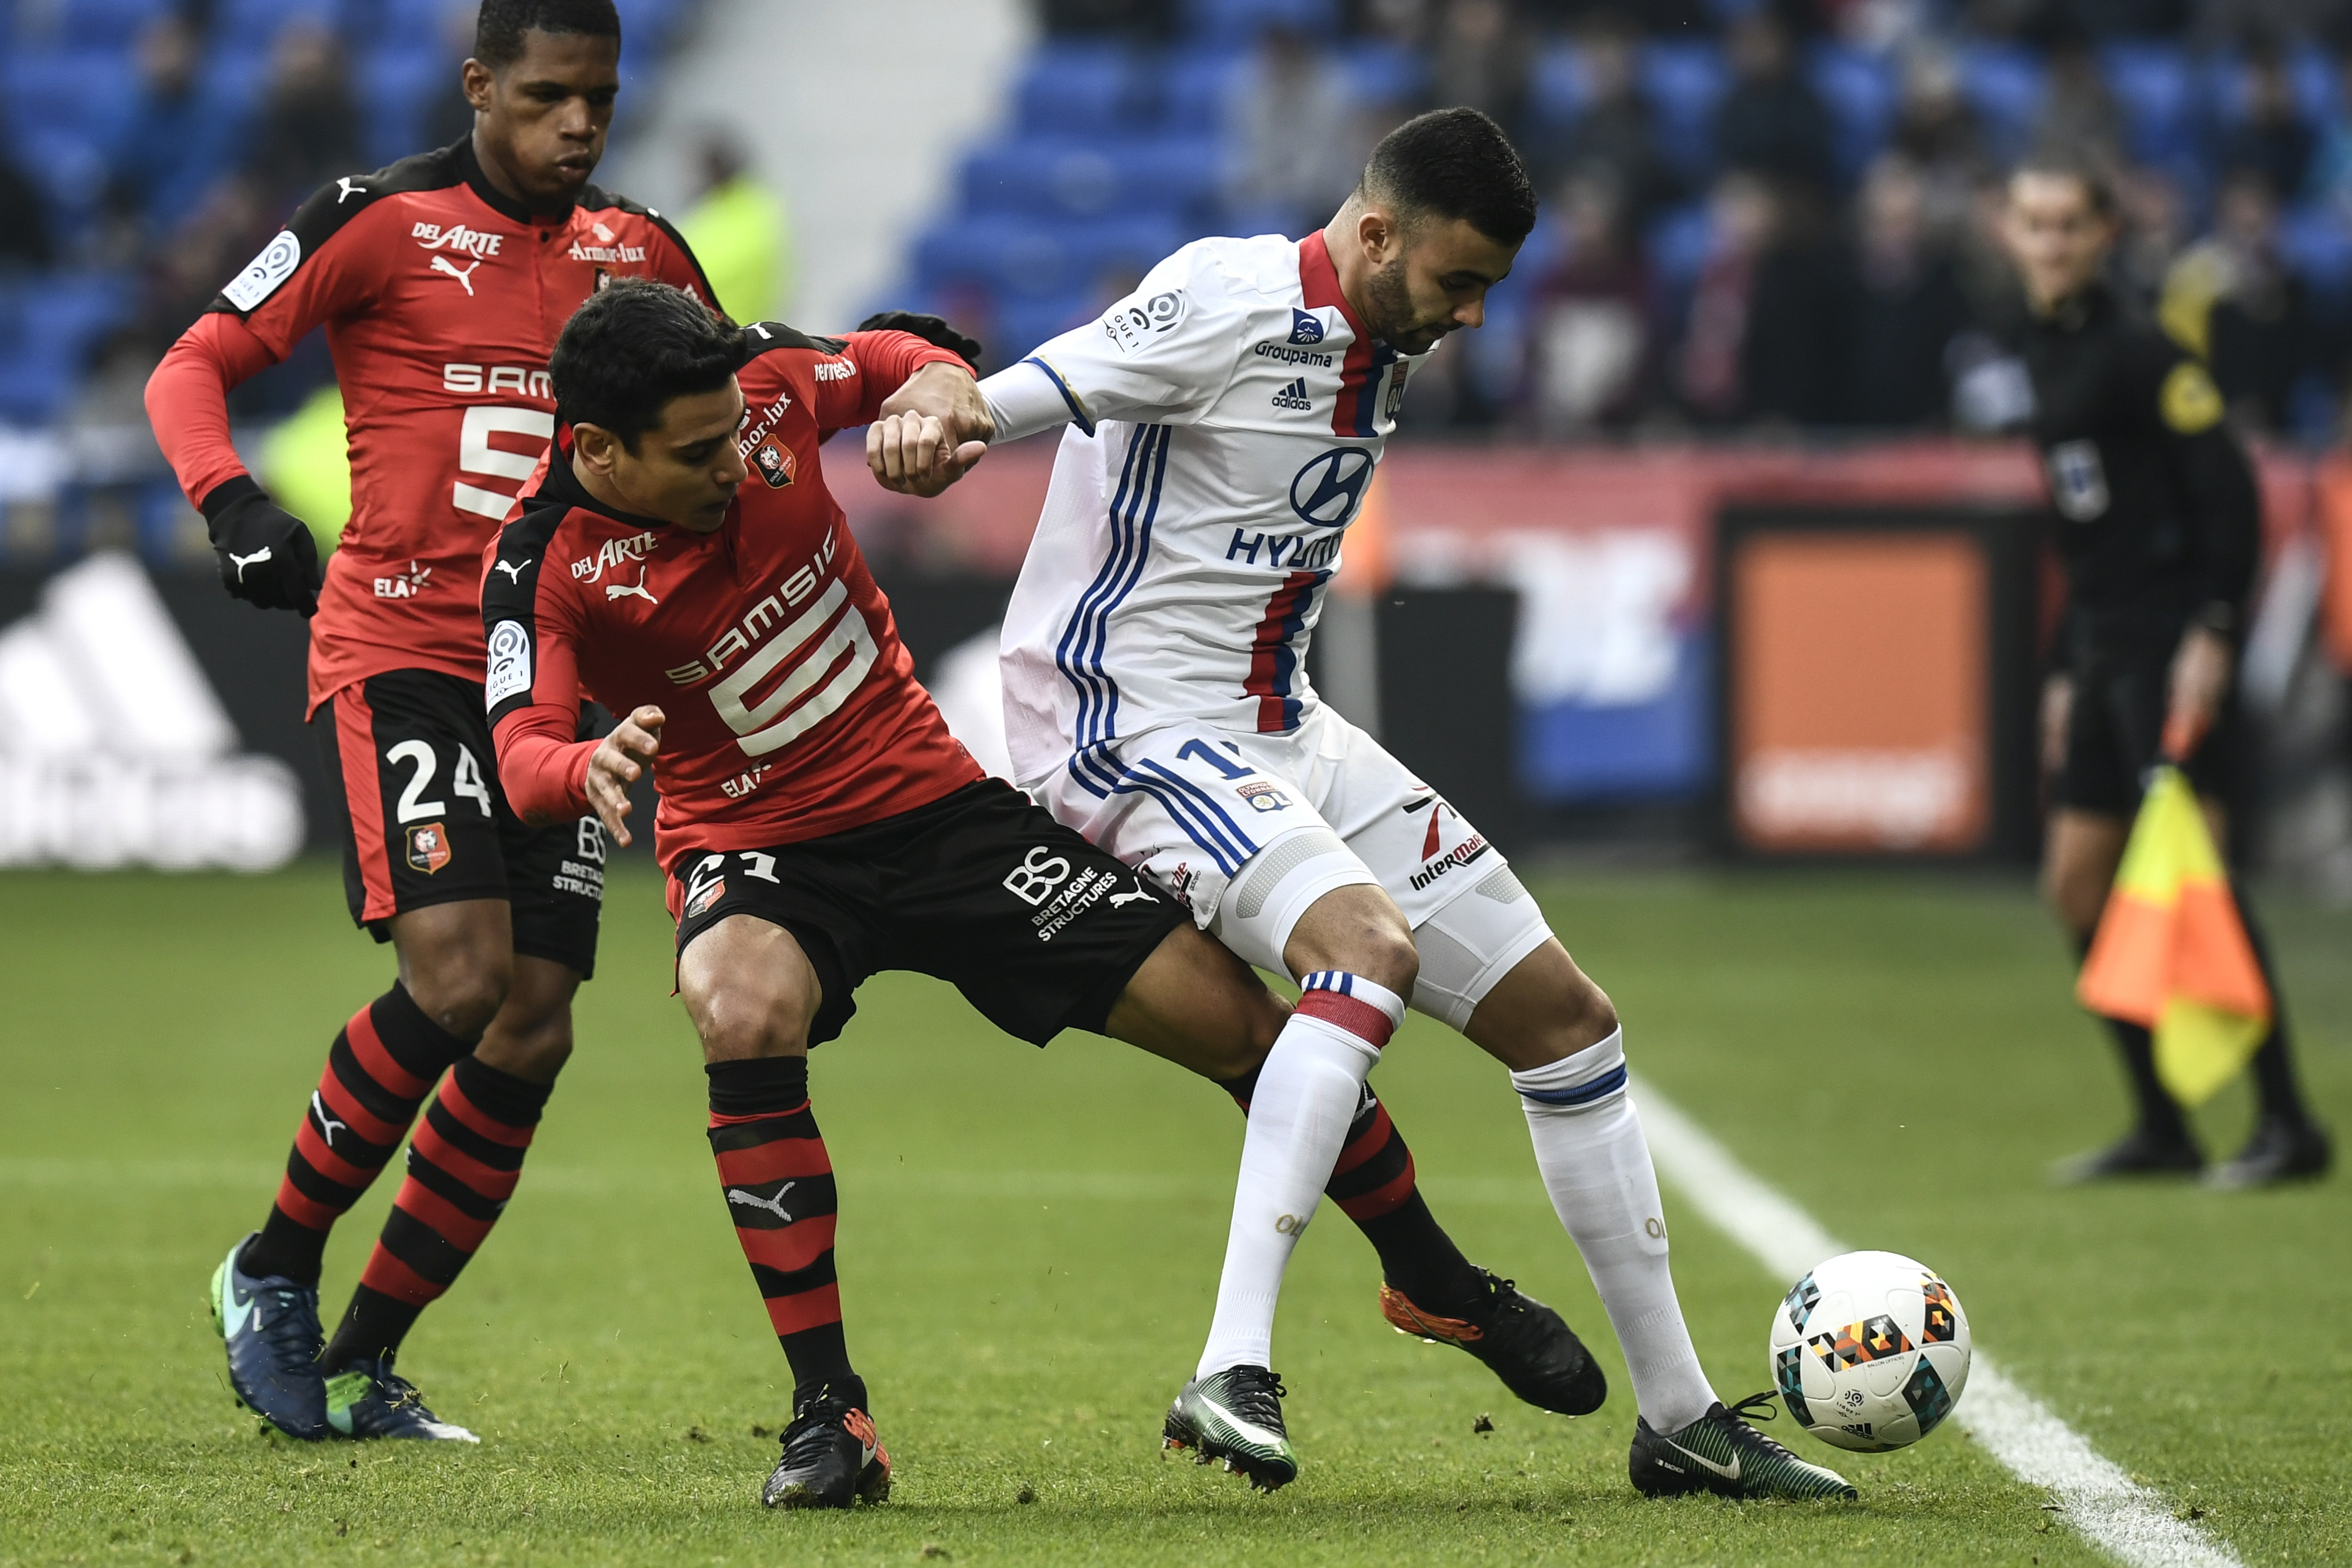 Rennes' French midfielder Benjamin Andre (2ndL) vies with Lyon's French Algerian midfielder Rachid Ghezzal (R)  during the French L1 football match Olympique Lyonnais (OL) vs Rennes (Stade Rennais) on December 11, 2016 at the Parc Olympique Lyonnais stadium in Decines-Charpieu, central-eastern France.  / AFP / JEFF PACHOUD        (Photo credit should read JEFF PACHOUD/AFP/Getty Images)